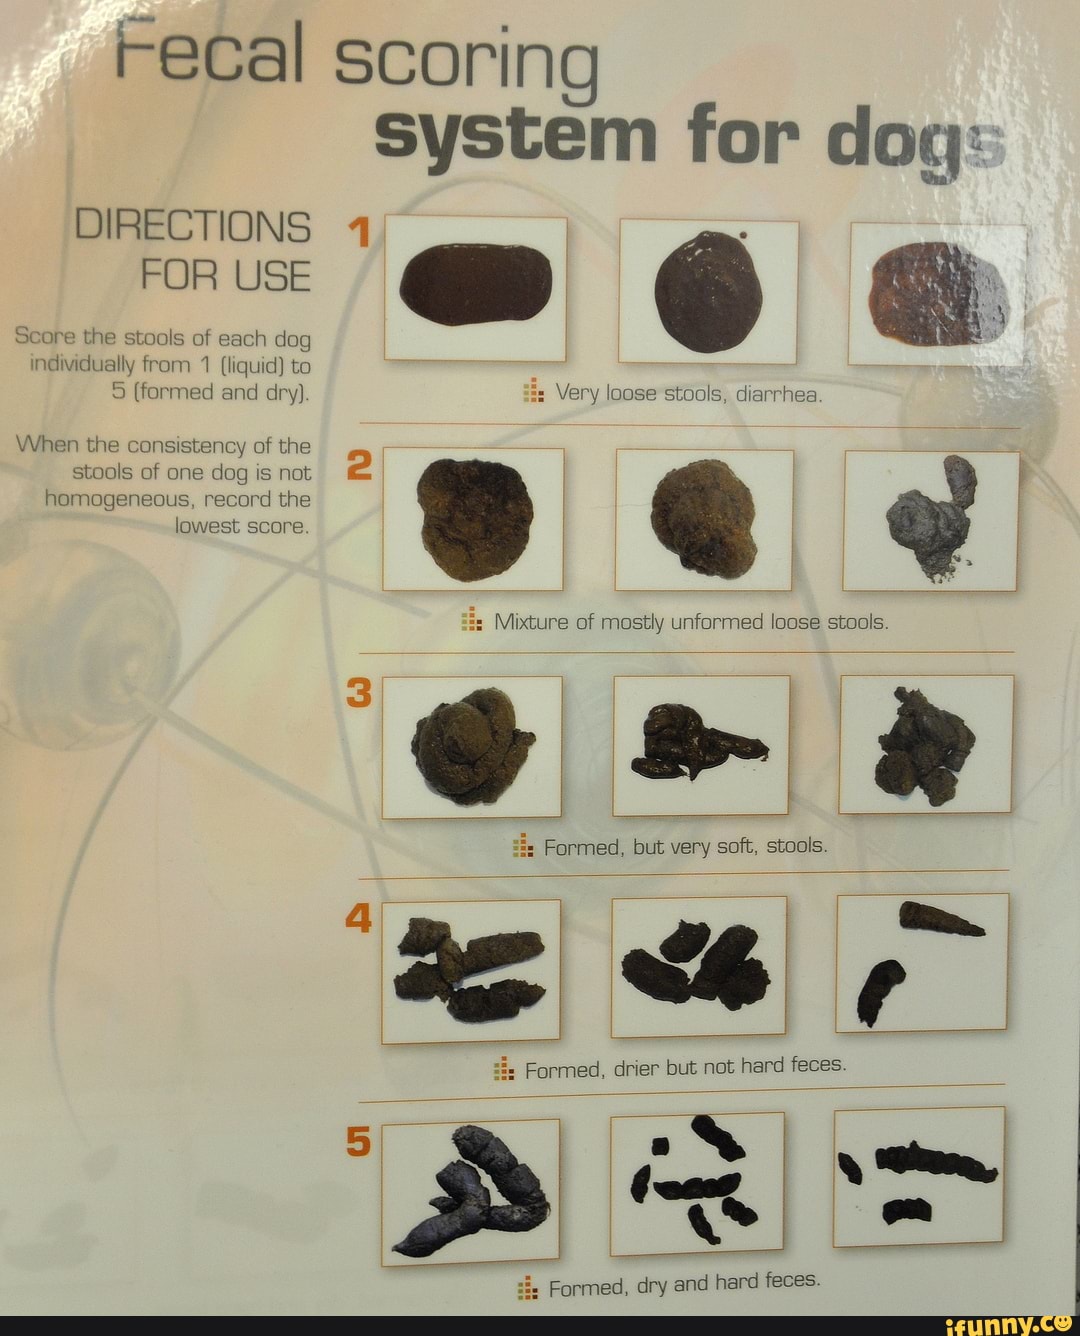 and can you imagine the trophy? Fecal scoring system for dog